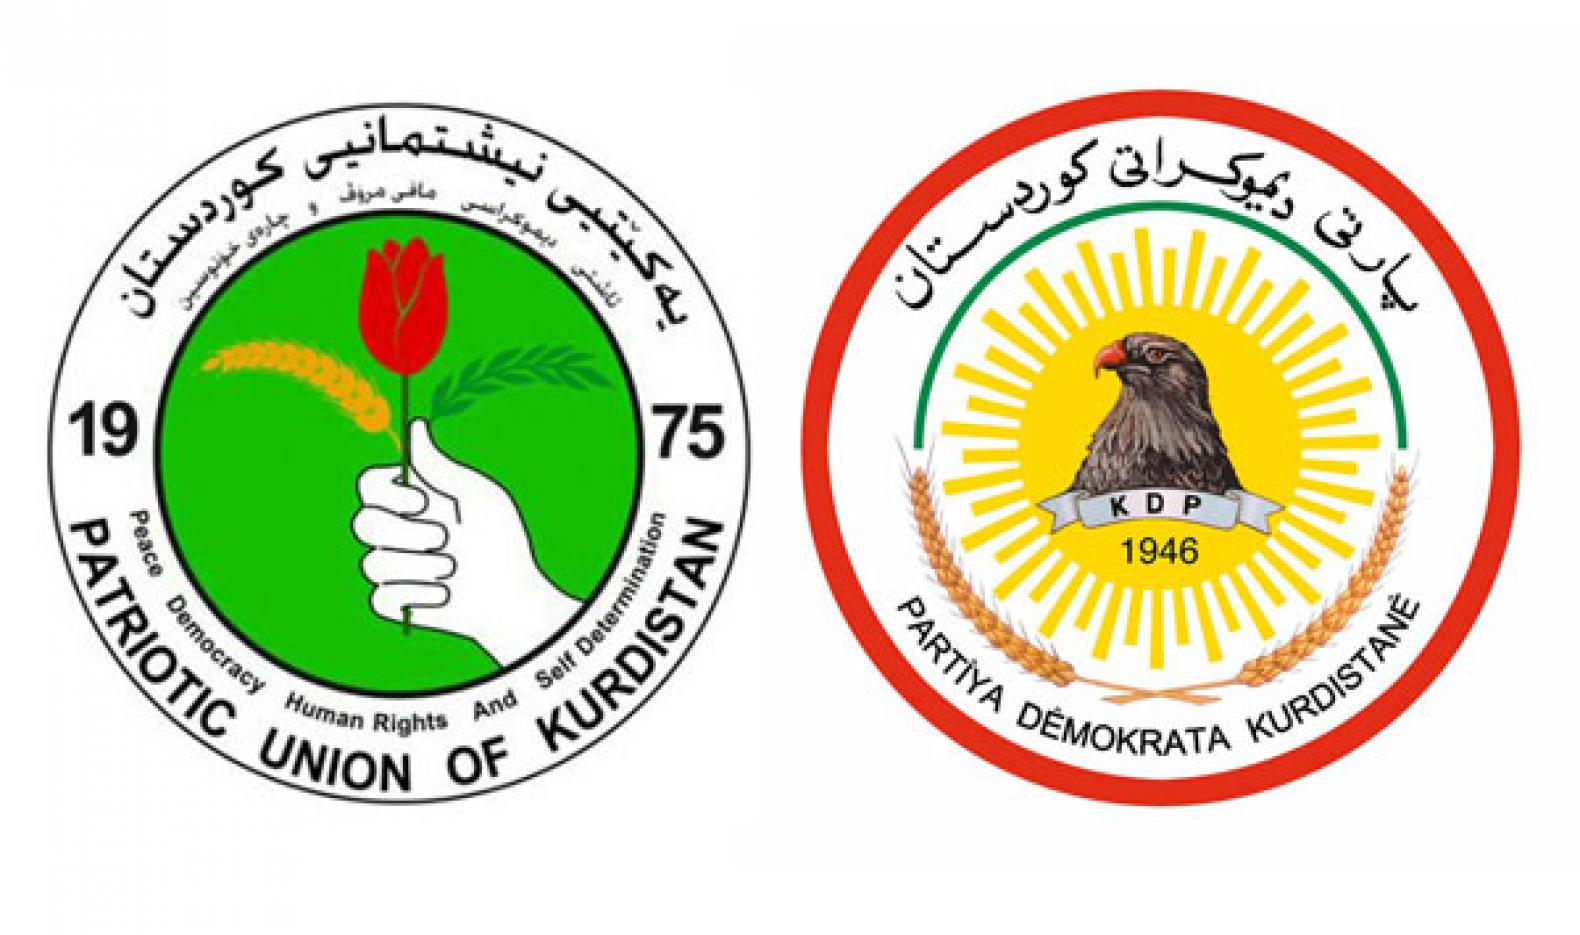 PUK is being pressured by local and international parties, MP says 